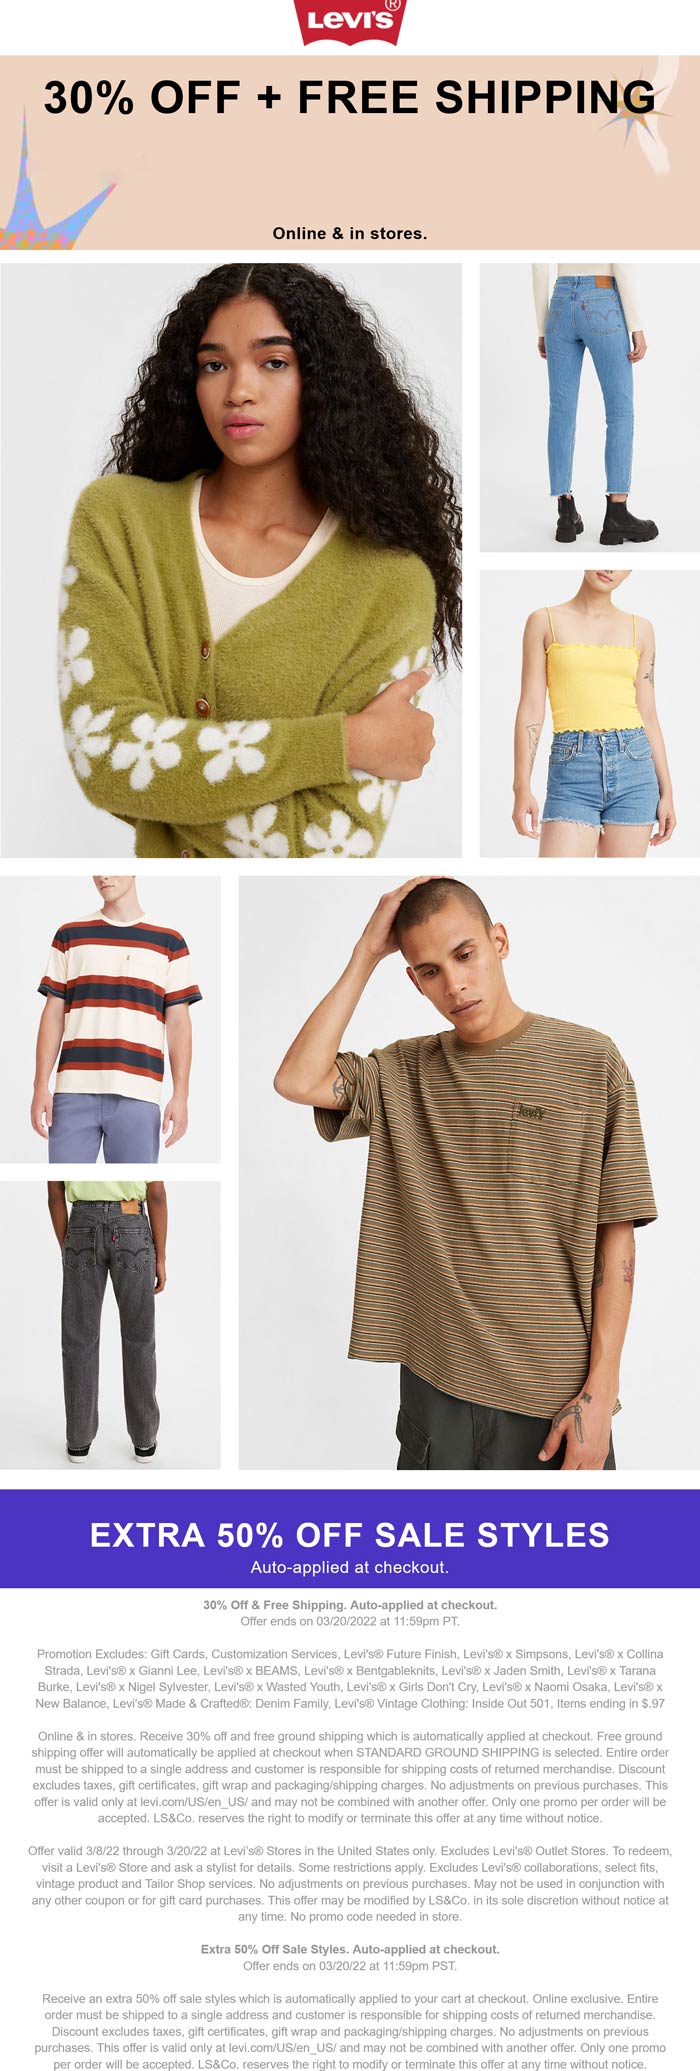 Levis stores Coupon  30% off regular & extra 50% off sale styles online at Levis #levis 